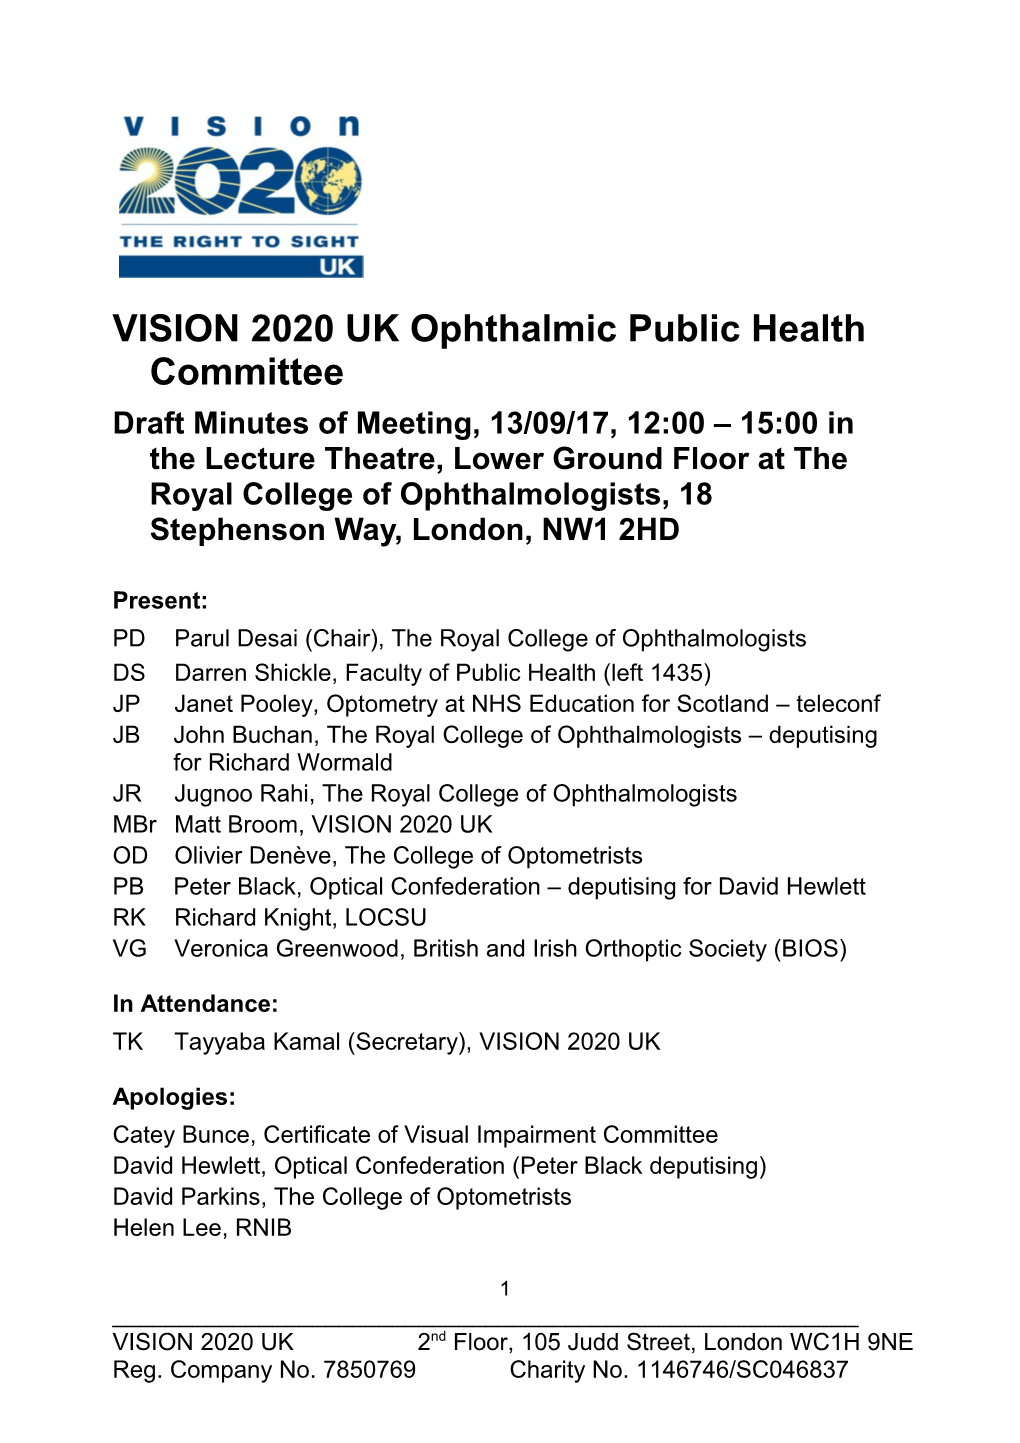 VISION 2020 UK Ophthalmic Public Health Committee